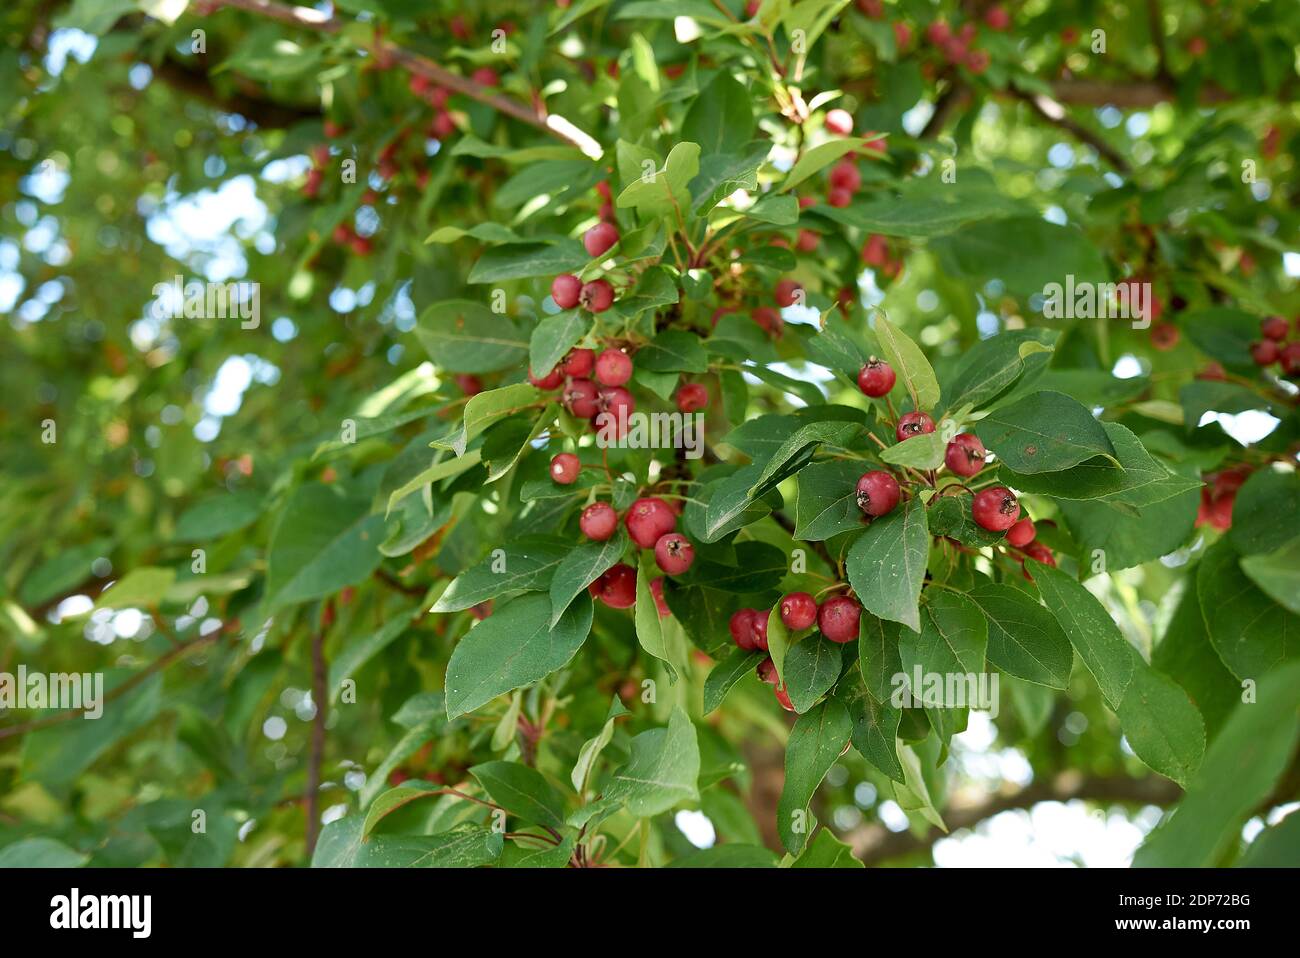 Malus baccata branch with red crab apples Stock Photo